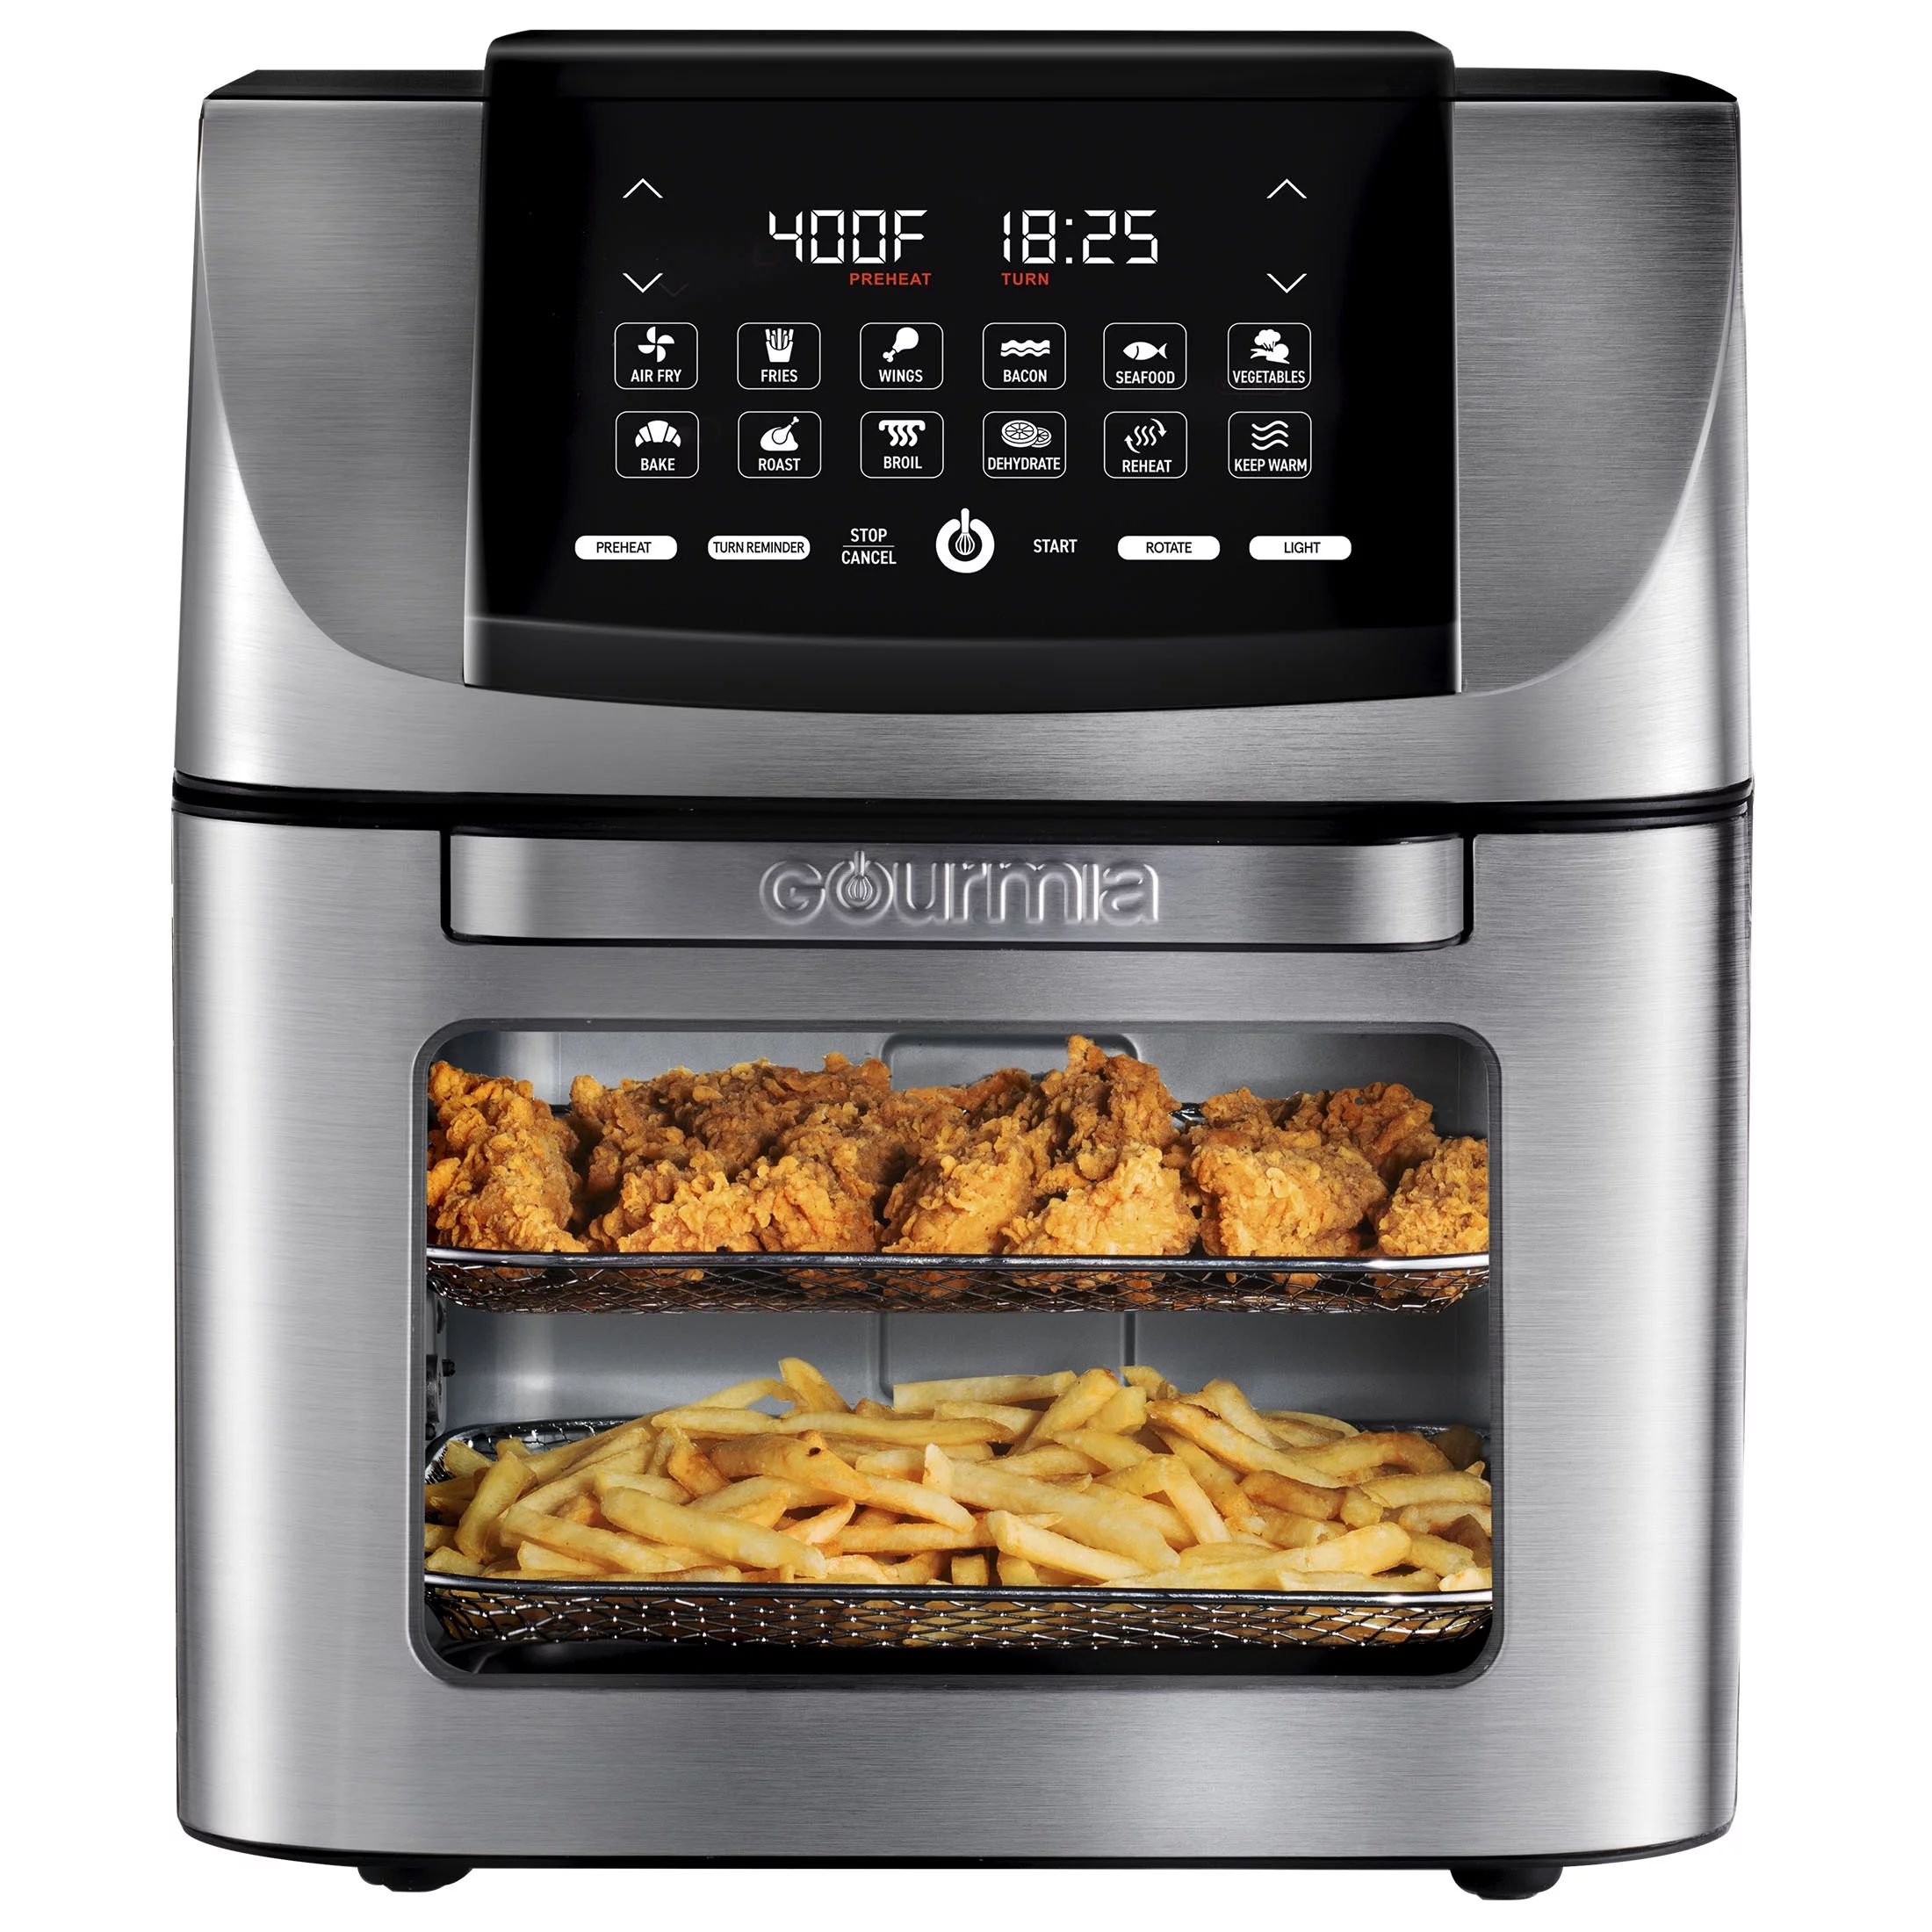 Gourmia 14 Qt All-in-One Air Fryer, Oven, Rotisserie, Dehydrator with 12 Cooking Functions | Walmart (US)